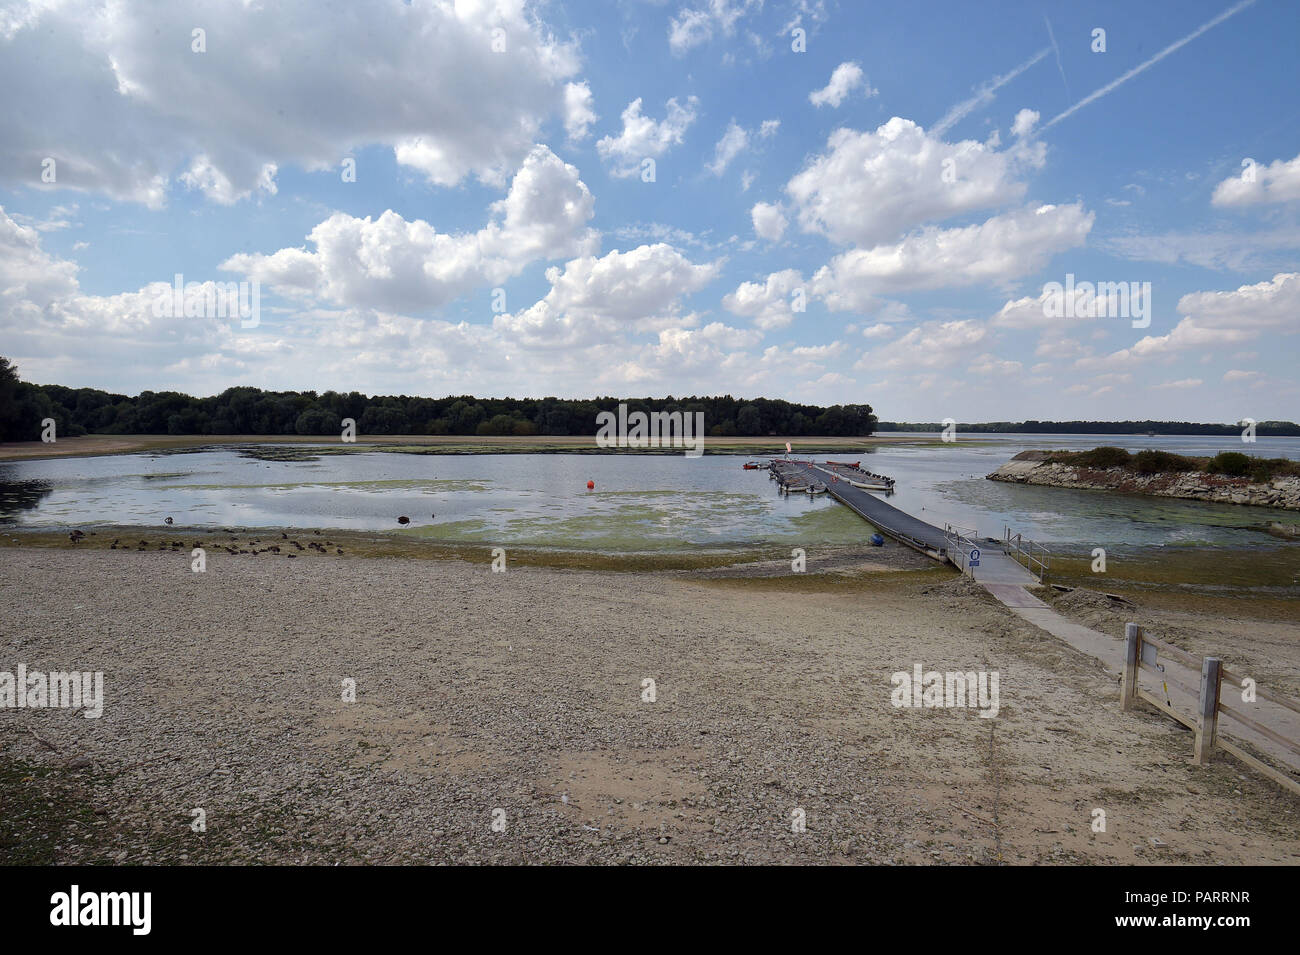 Very low water levels, expose the normally water covered shore line, at Hanningfield reservoir, near Chelmsford in Essex, as the hot weather continues across the country. Stock Photo